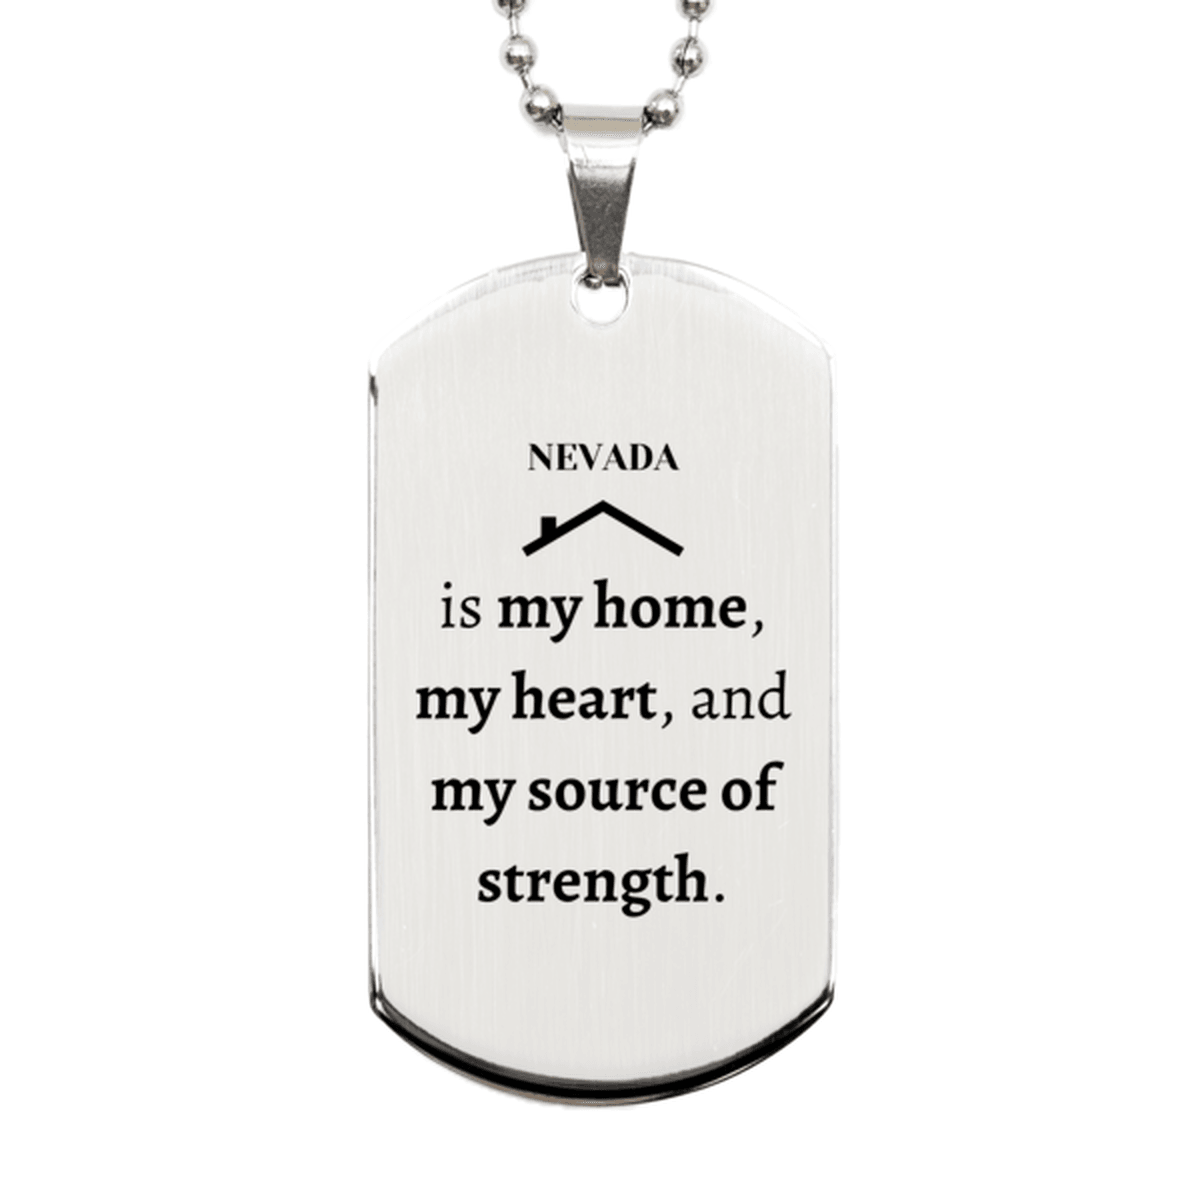 Nevada is my home Gifts, Lovely Nevada Birthday Christmas Silver Dog Tag For People from Nevada, Men, Women, Friends - Mallard Moon Gift Shop